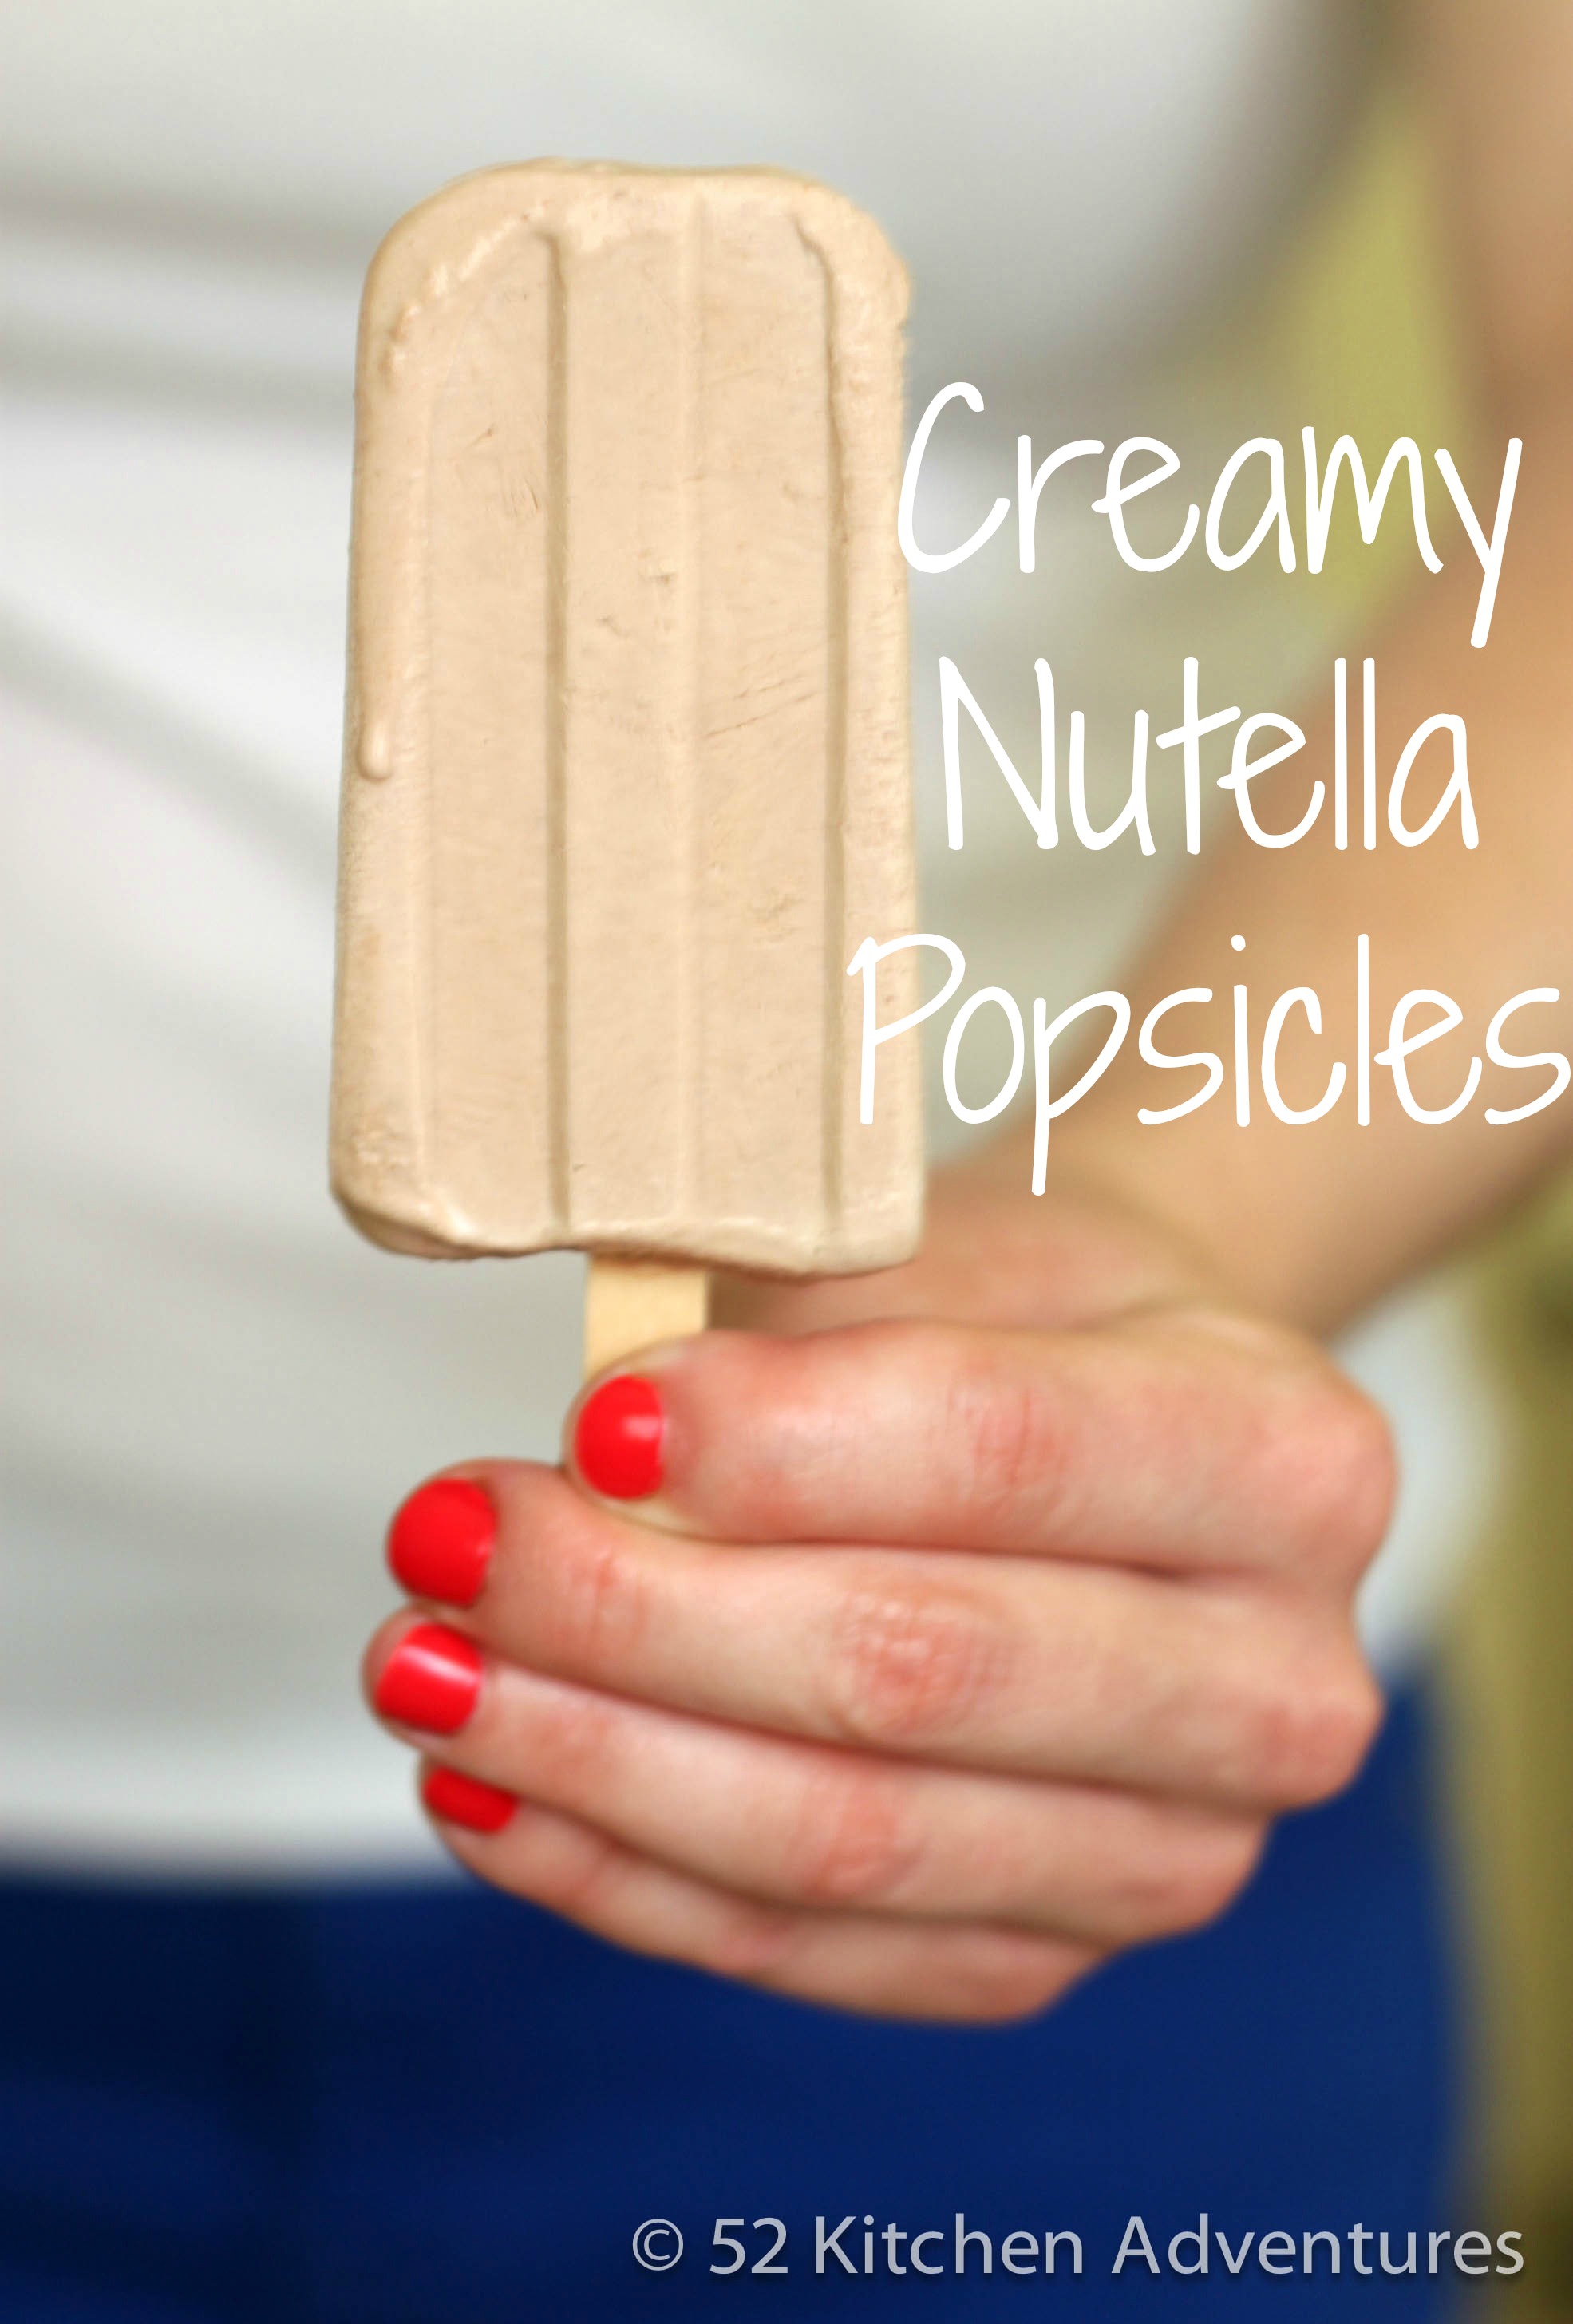 Creamy Nutella Popsicle with Text